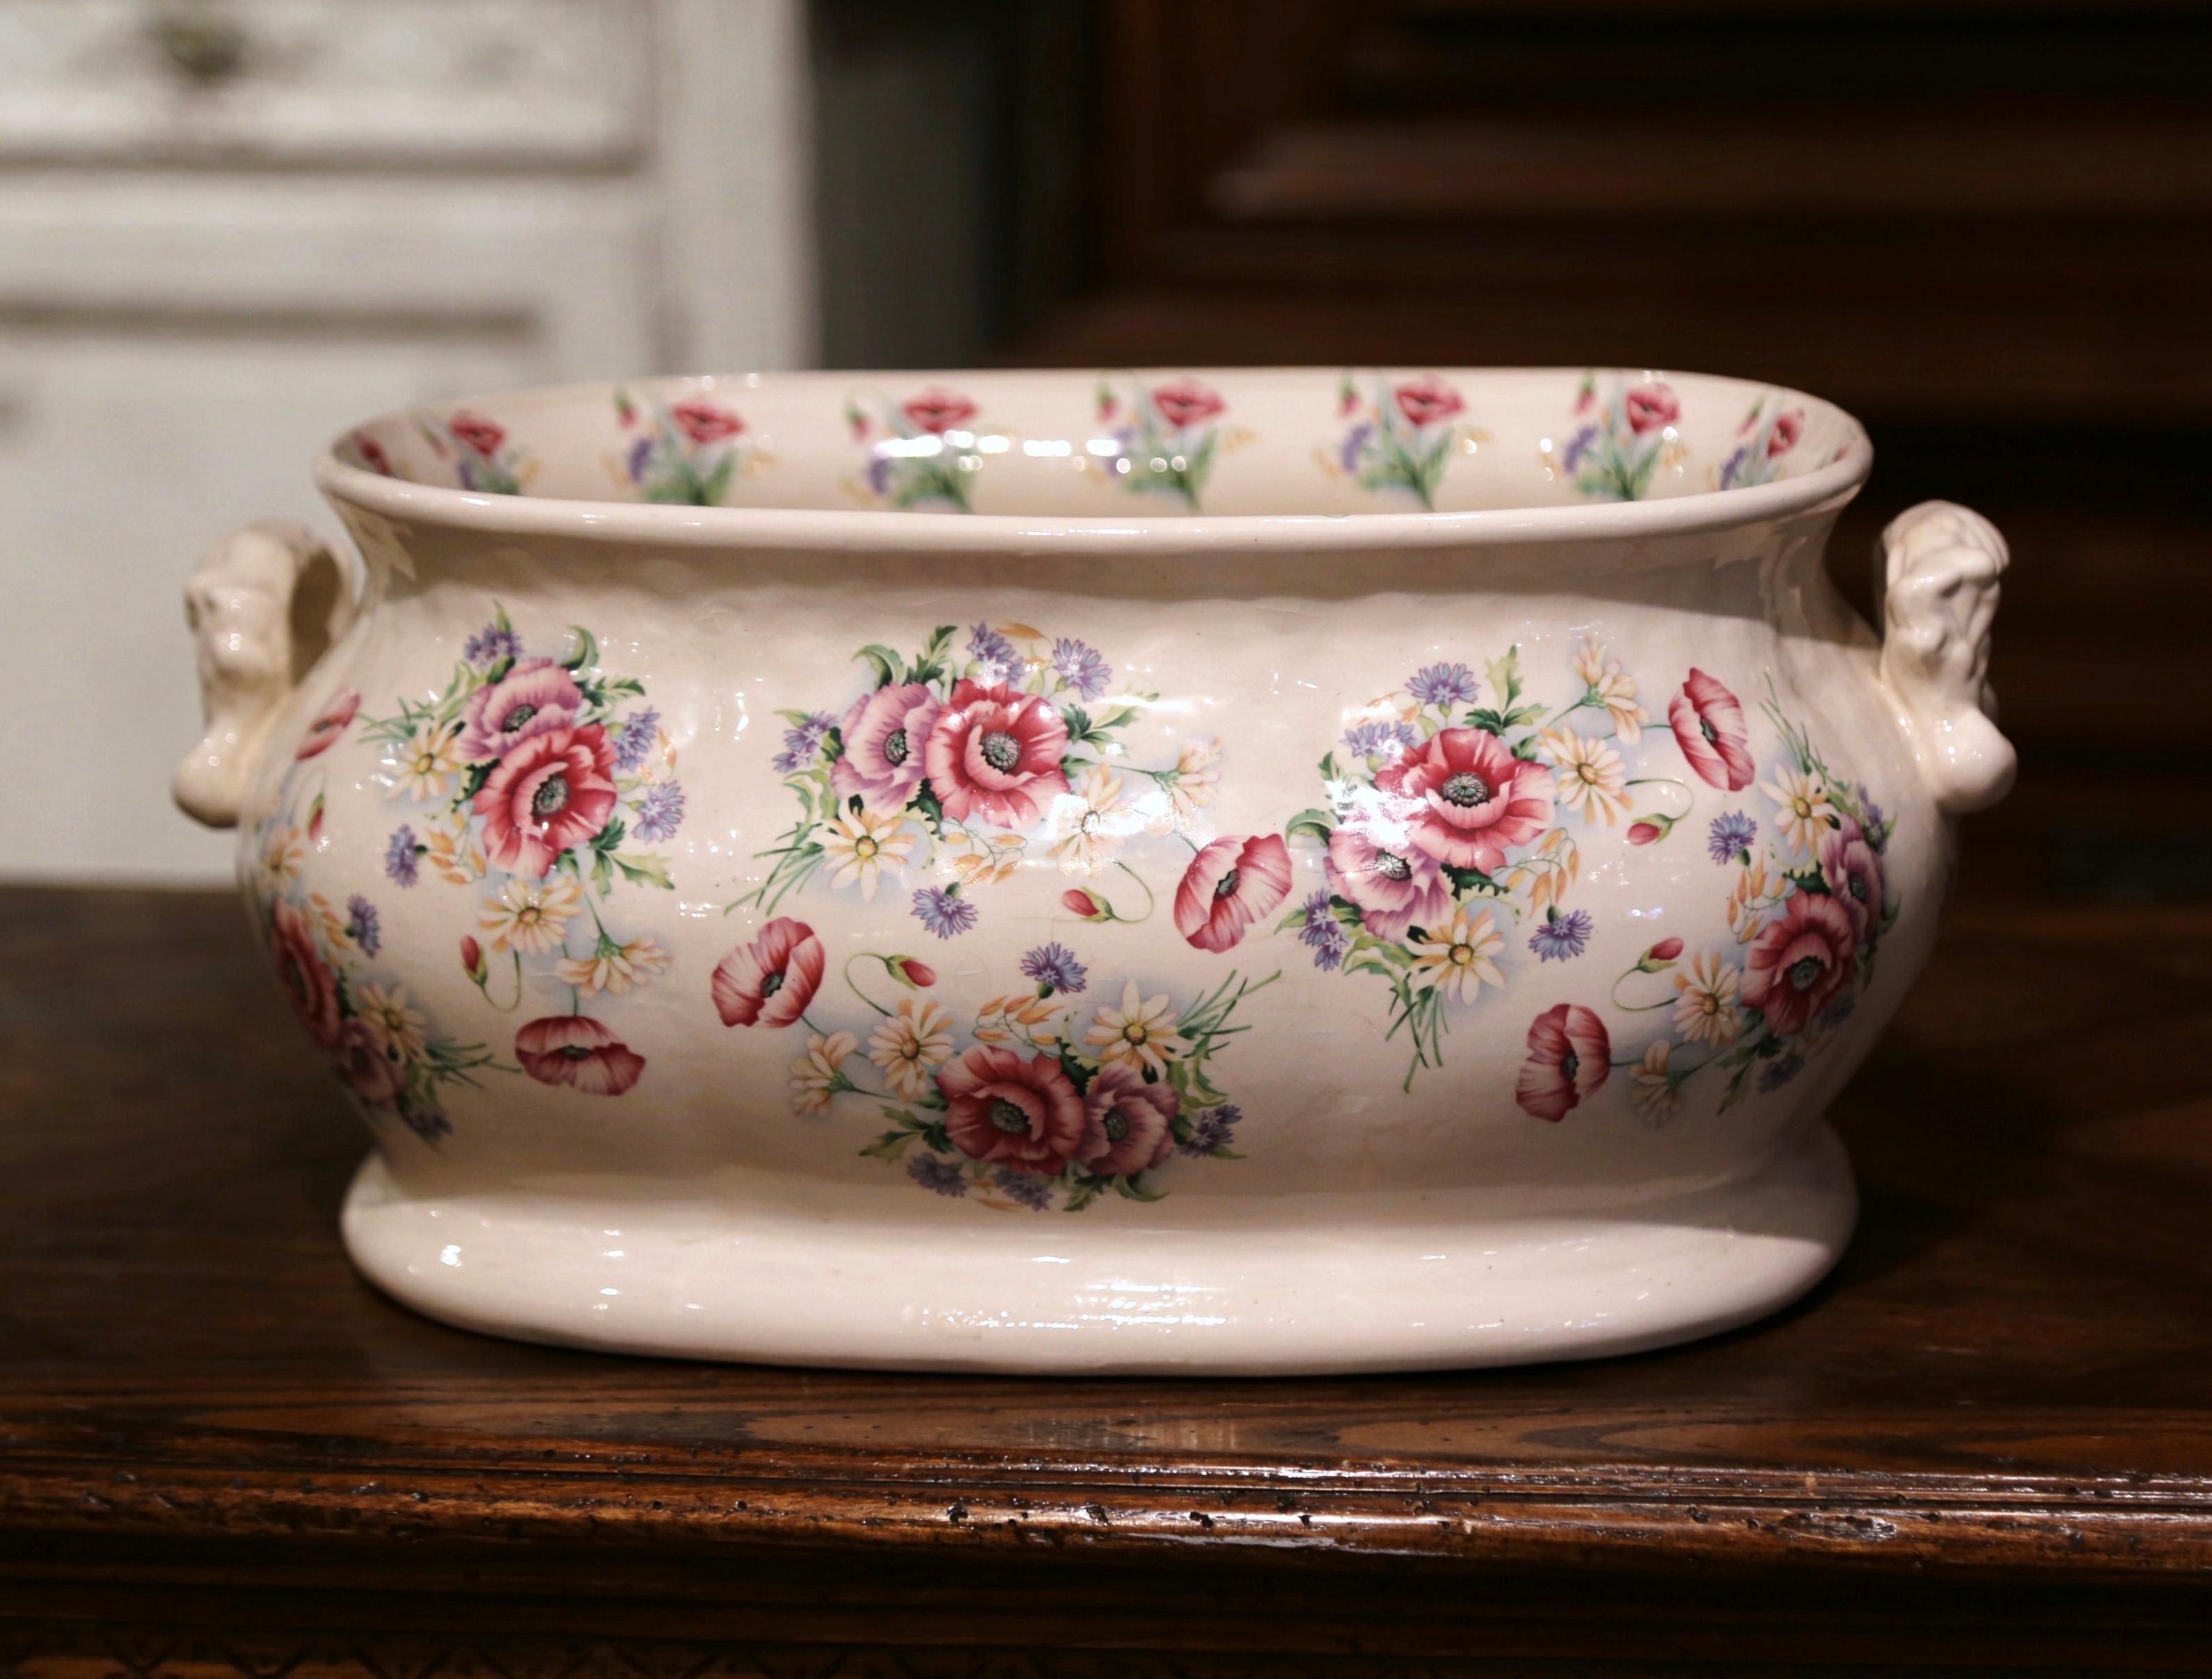 Crafted in England circa 1920 and oval in shape with bowed sides, the antique porcelain basin features two side handles and is hand painted with floral motifs in the pink and pale blue palette. This elegant and colorful jardinière is in excellent